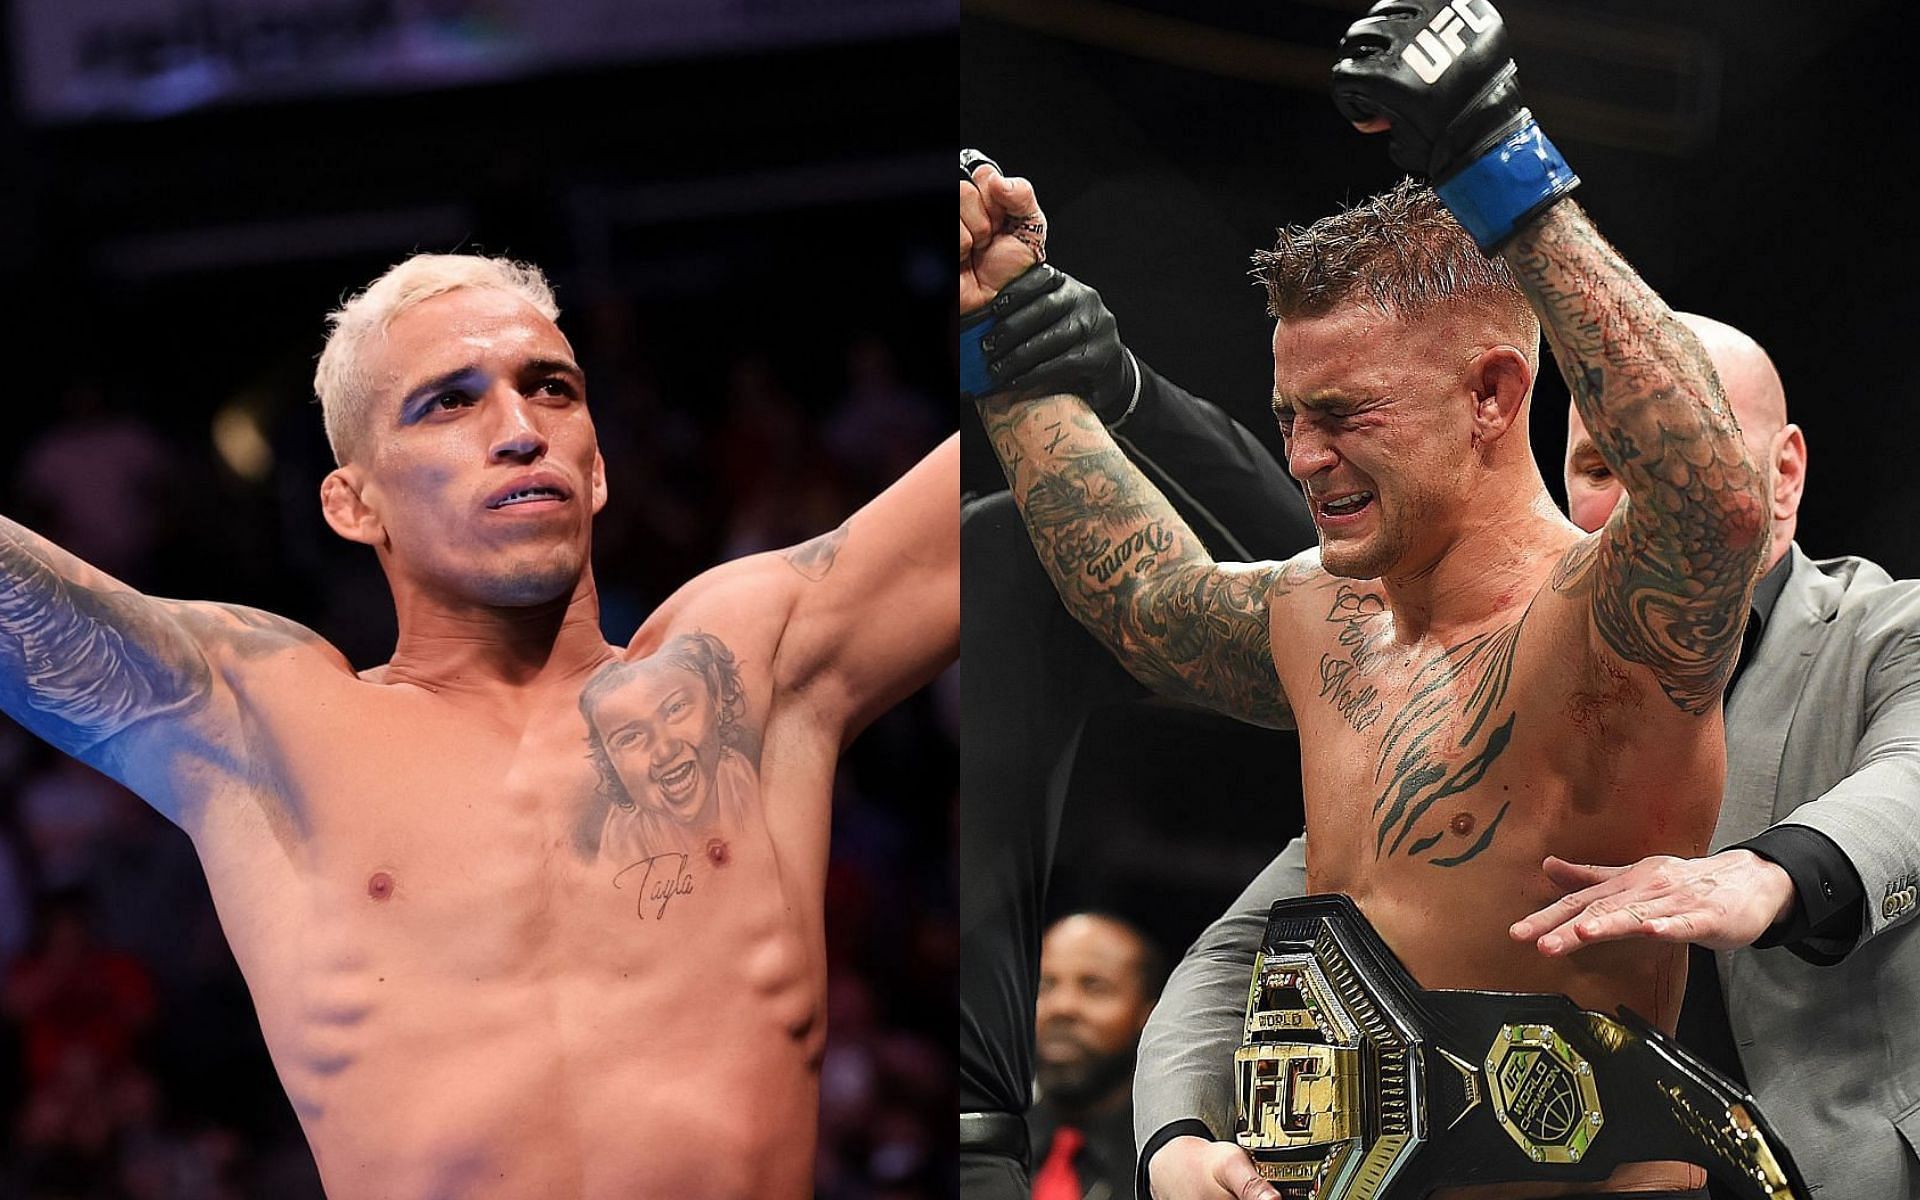 Charles Oliveira believes Dustin Poirier deserves respect ahead of their clash at UFC 269 next month